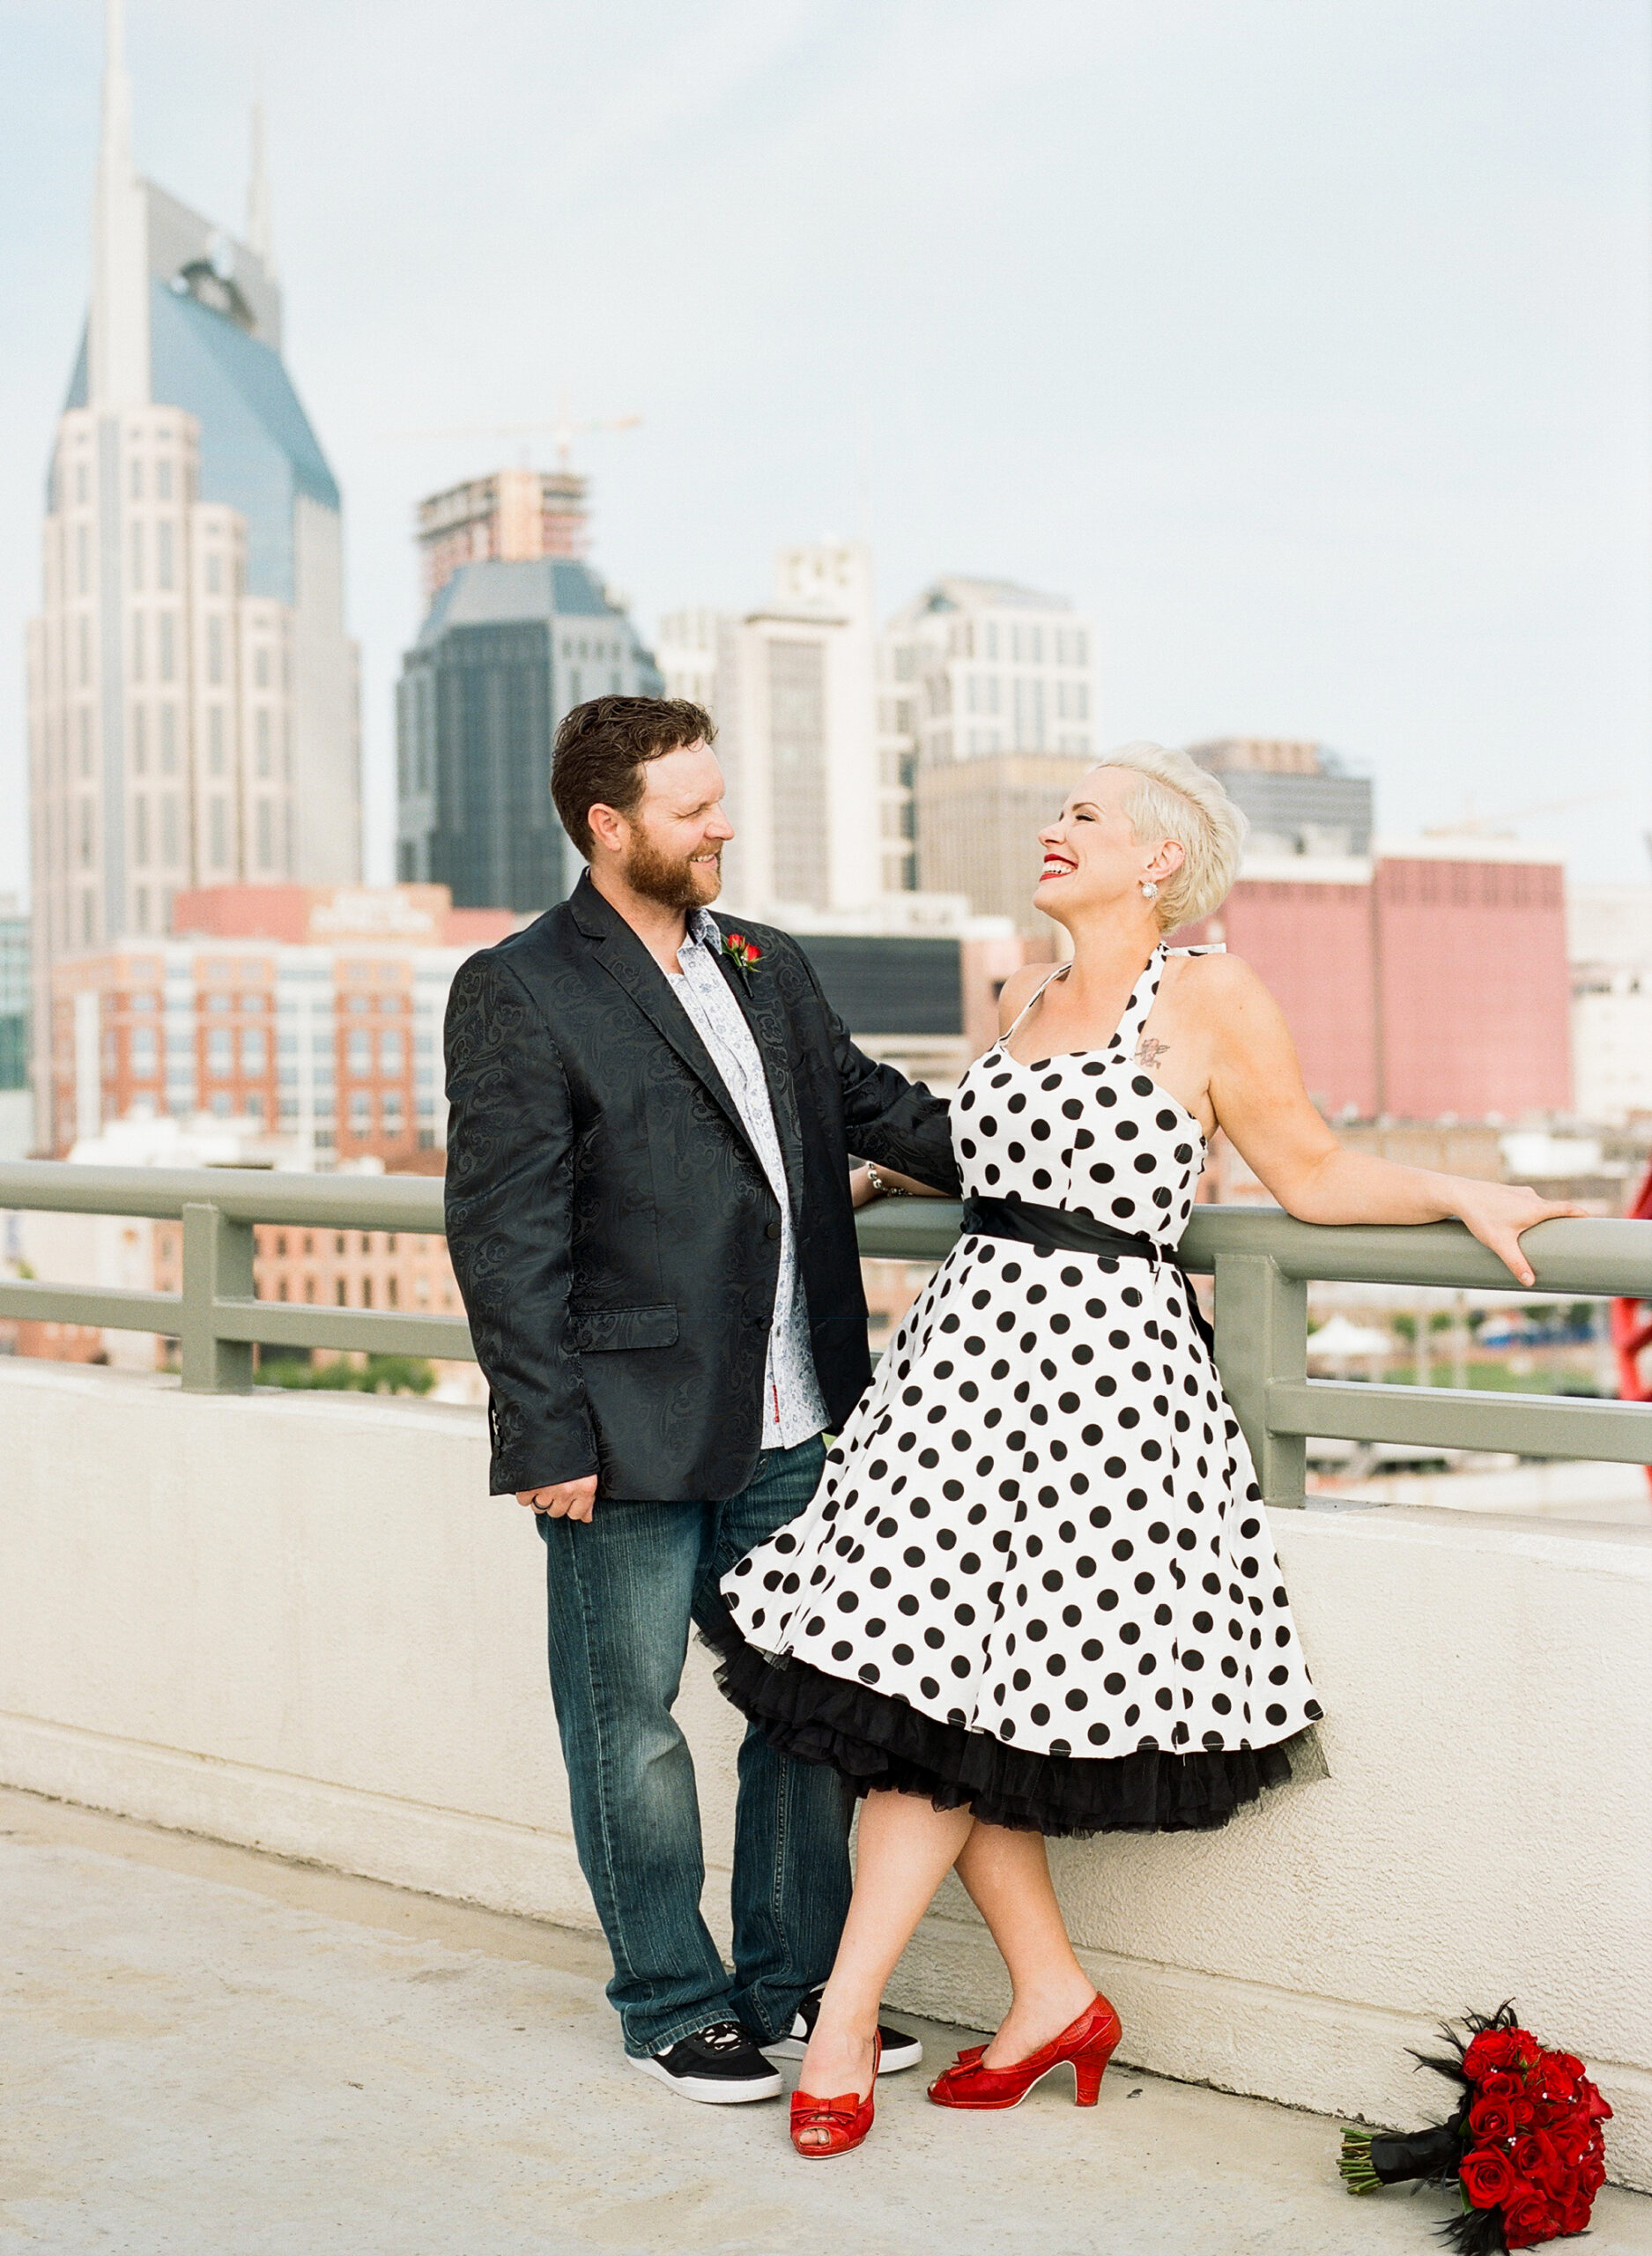 Standing on the pedestrian bridge with the Nashville skyline in the background, The bride laughs at the groom as she leans back on the railing. She is wearing a halter neck white pinup dress with black polka dots. She has a black belt and a black crinoline petticoat. The bride has bright red lipstick to match her bright red peep toe shoes with a small bow. Her bright red rose bouquet accented with rhinestones and black feathers is on the ground by her feet. The groom is wearing a black silk suit jacket with a paisley pattern, a white shirt with small blue flowers, a red rose boutonniere and dark washed jeans. 